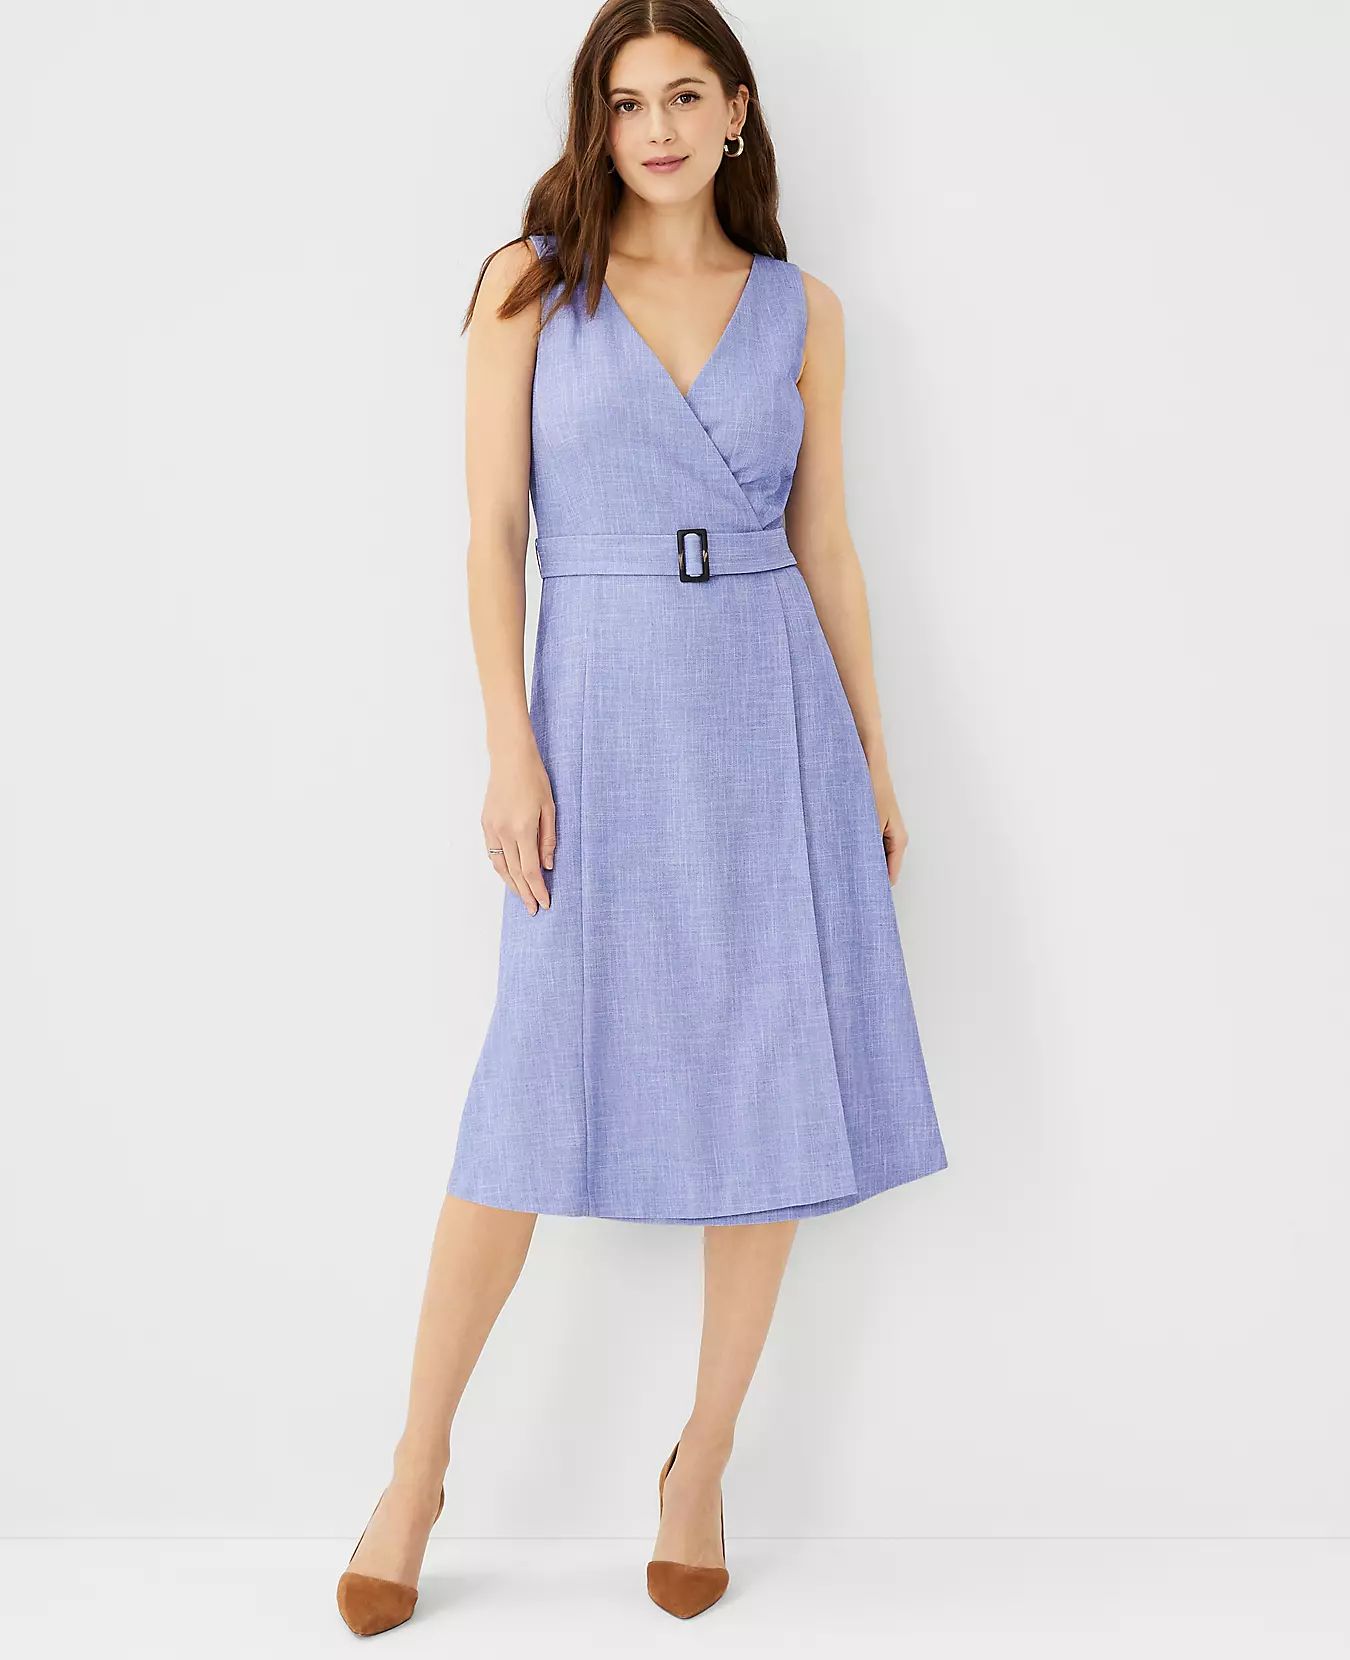 The Belted Sleeveless Dress in Cross Weave | Ann Taylor (US)